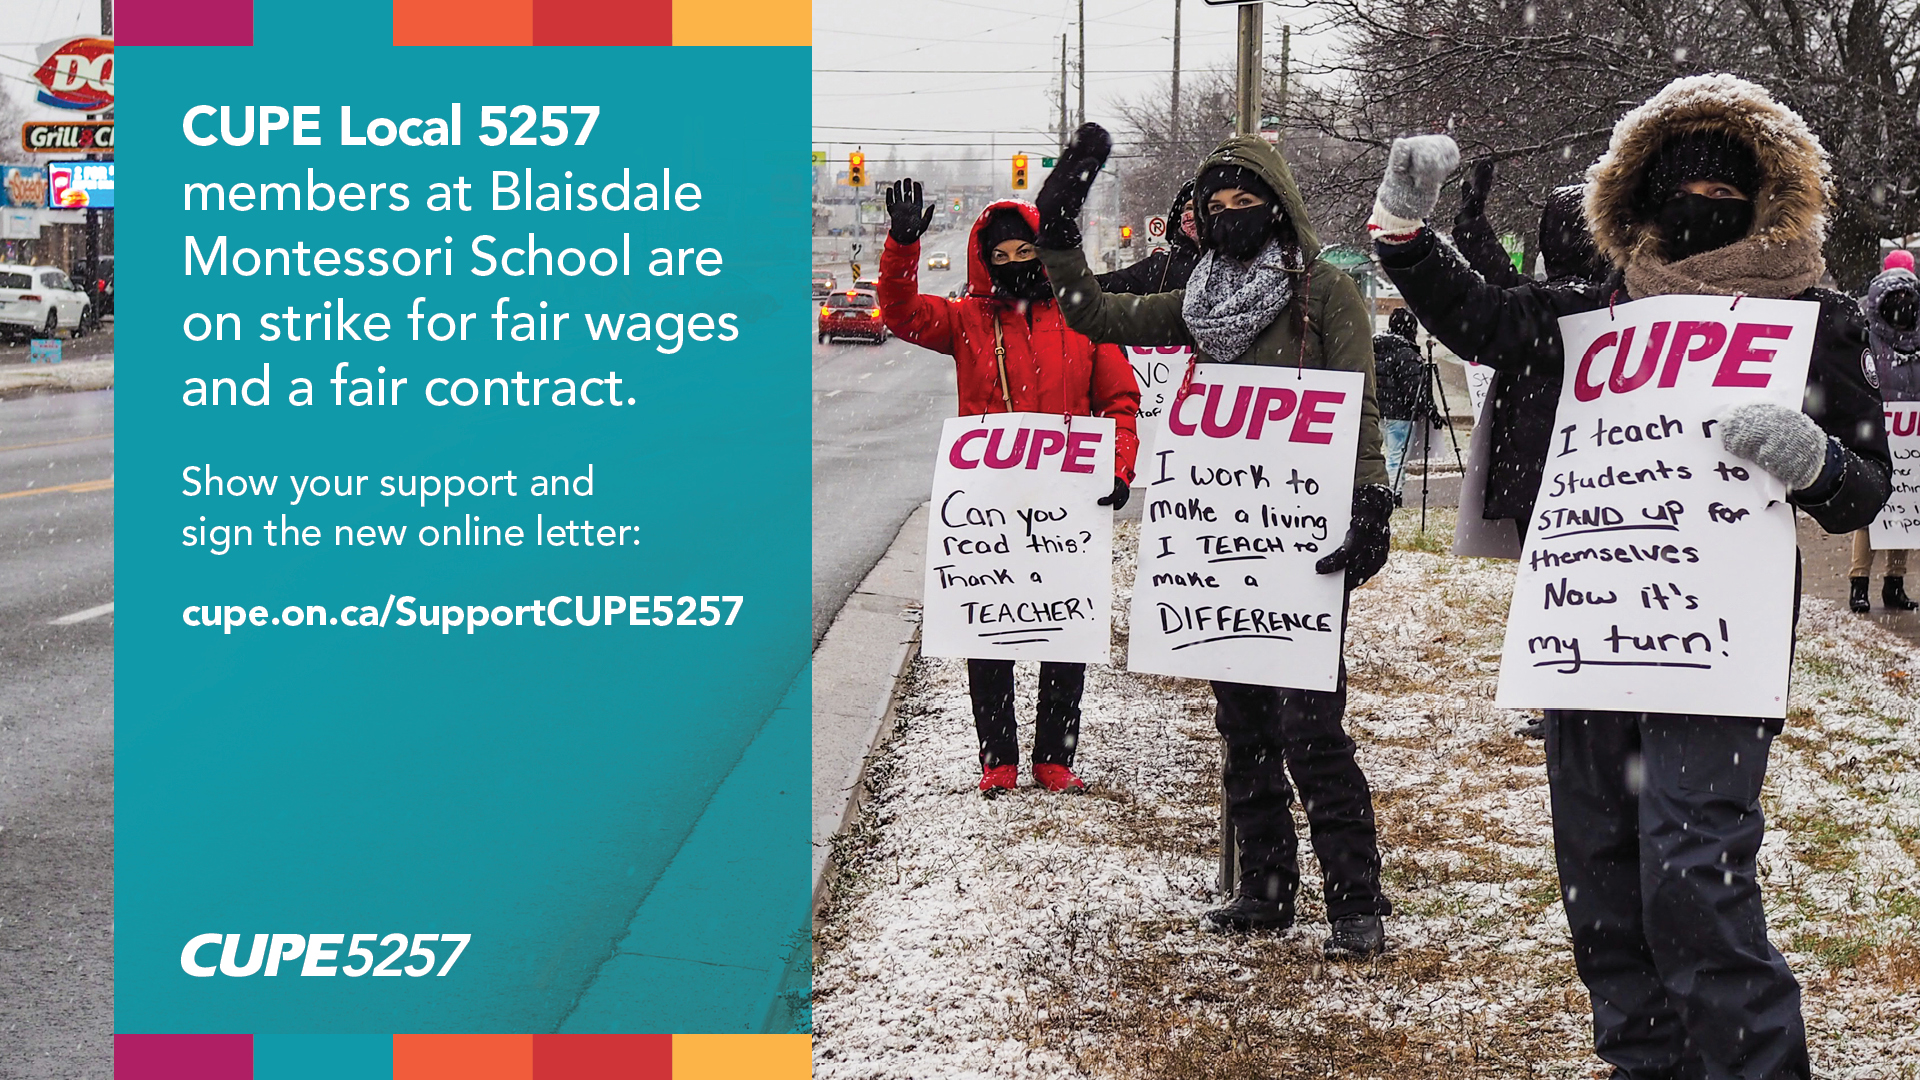 CUPE Local 5257 members at Blaisdale Montessori School are on strike for fair wages and a fair contract. Show your support and sign the new online letter: cupe.on.ca/SupportCUPE5257